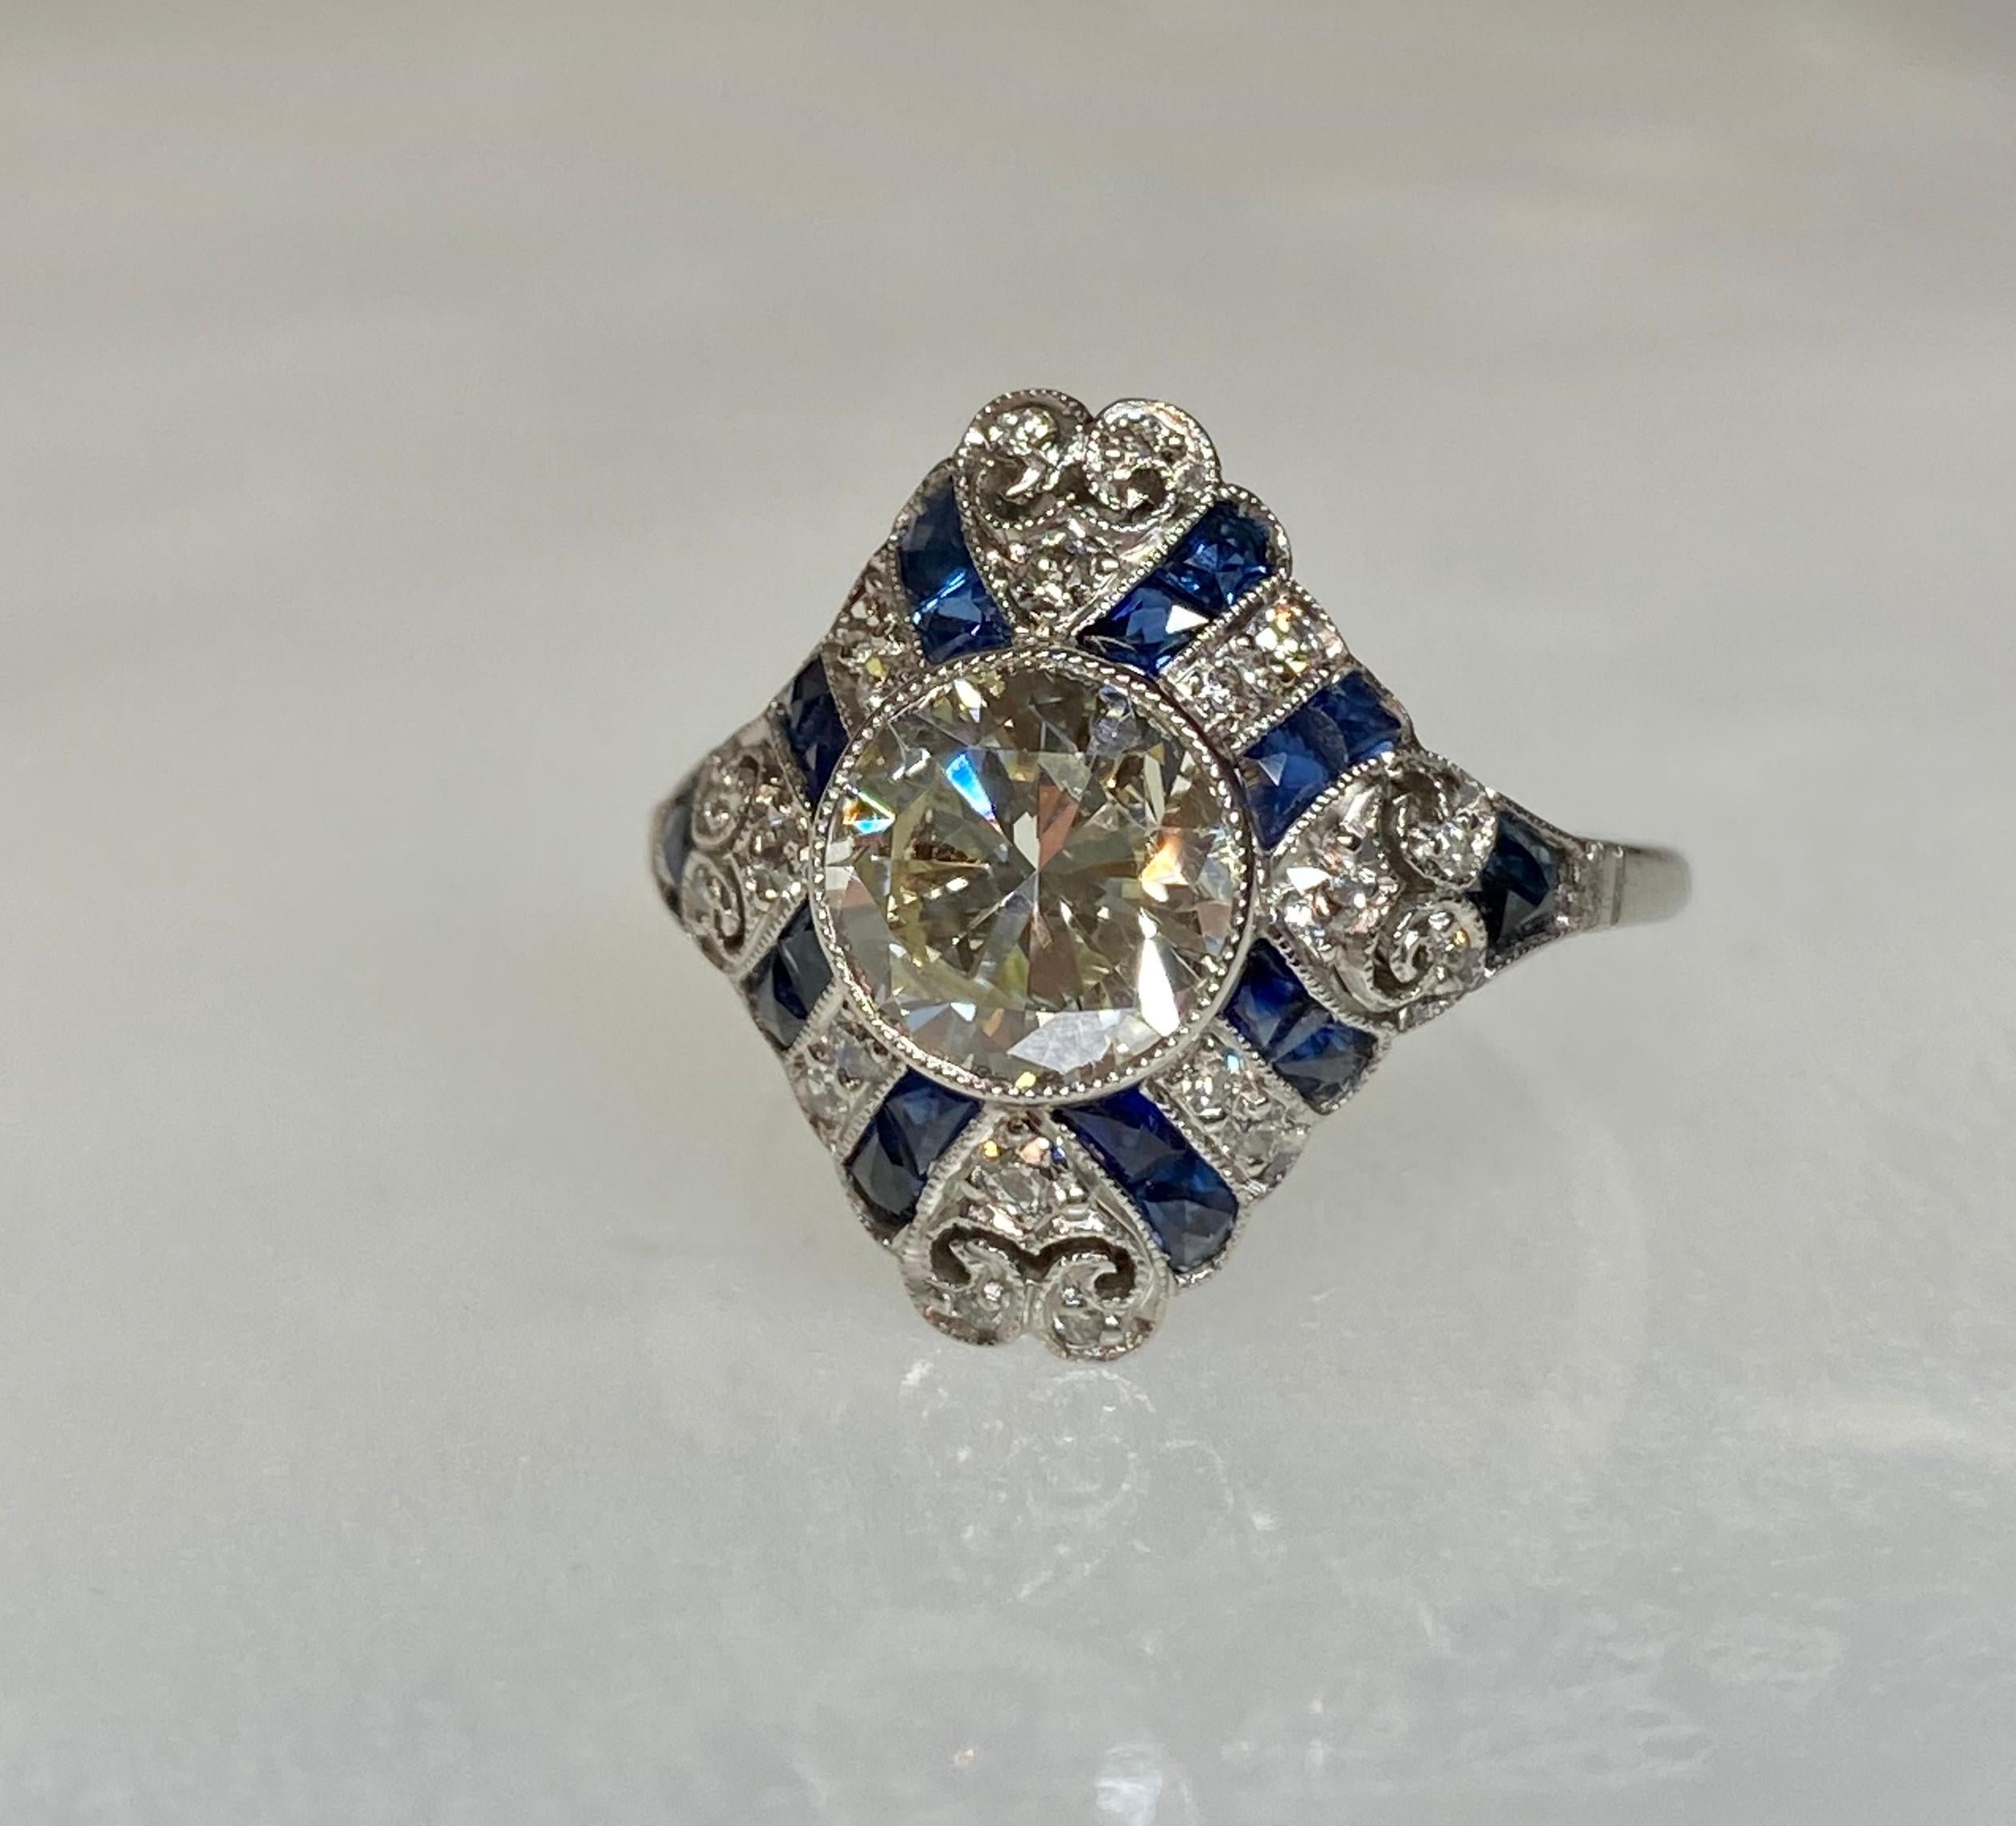 1.52 Carat Old European Cut Diamond and Sapphire Art Deco Inspired Ring For Sale 3